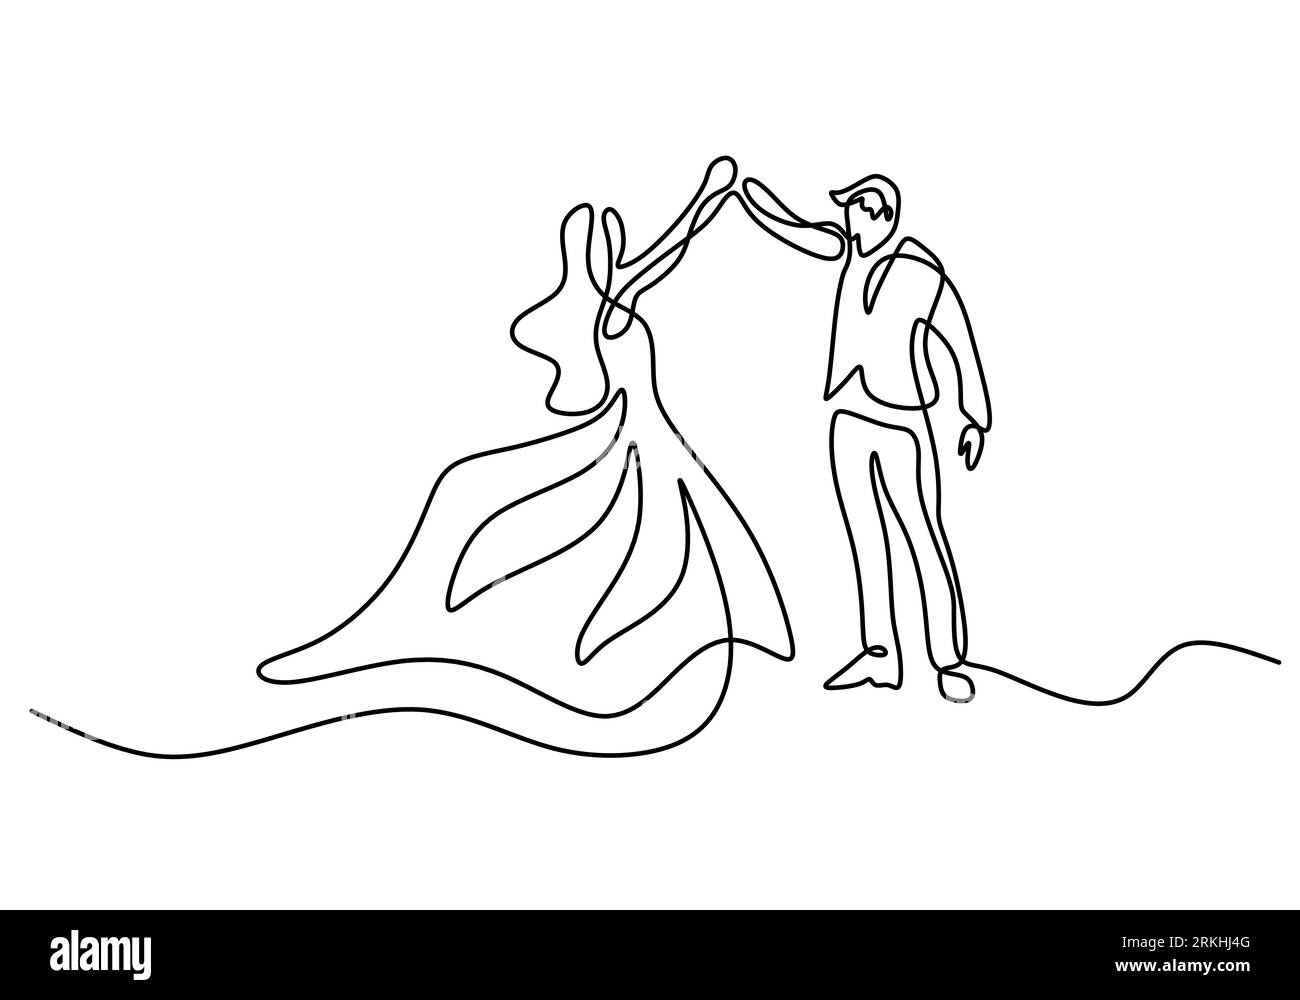 Continuous one line drawing of couple dance isolated on white background. Man with tuxedo and woman with elegant gown doing romantic dancing minimalis Stock Vector